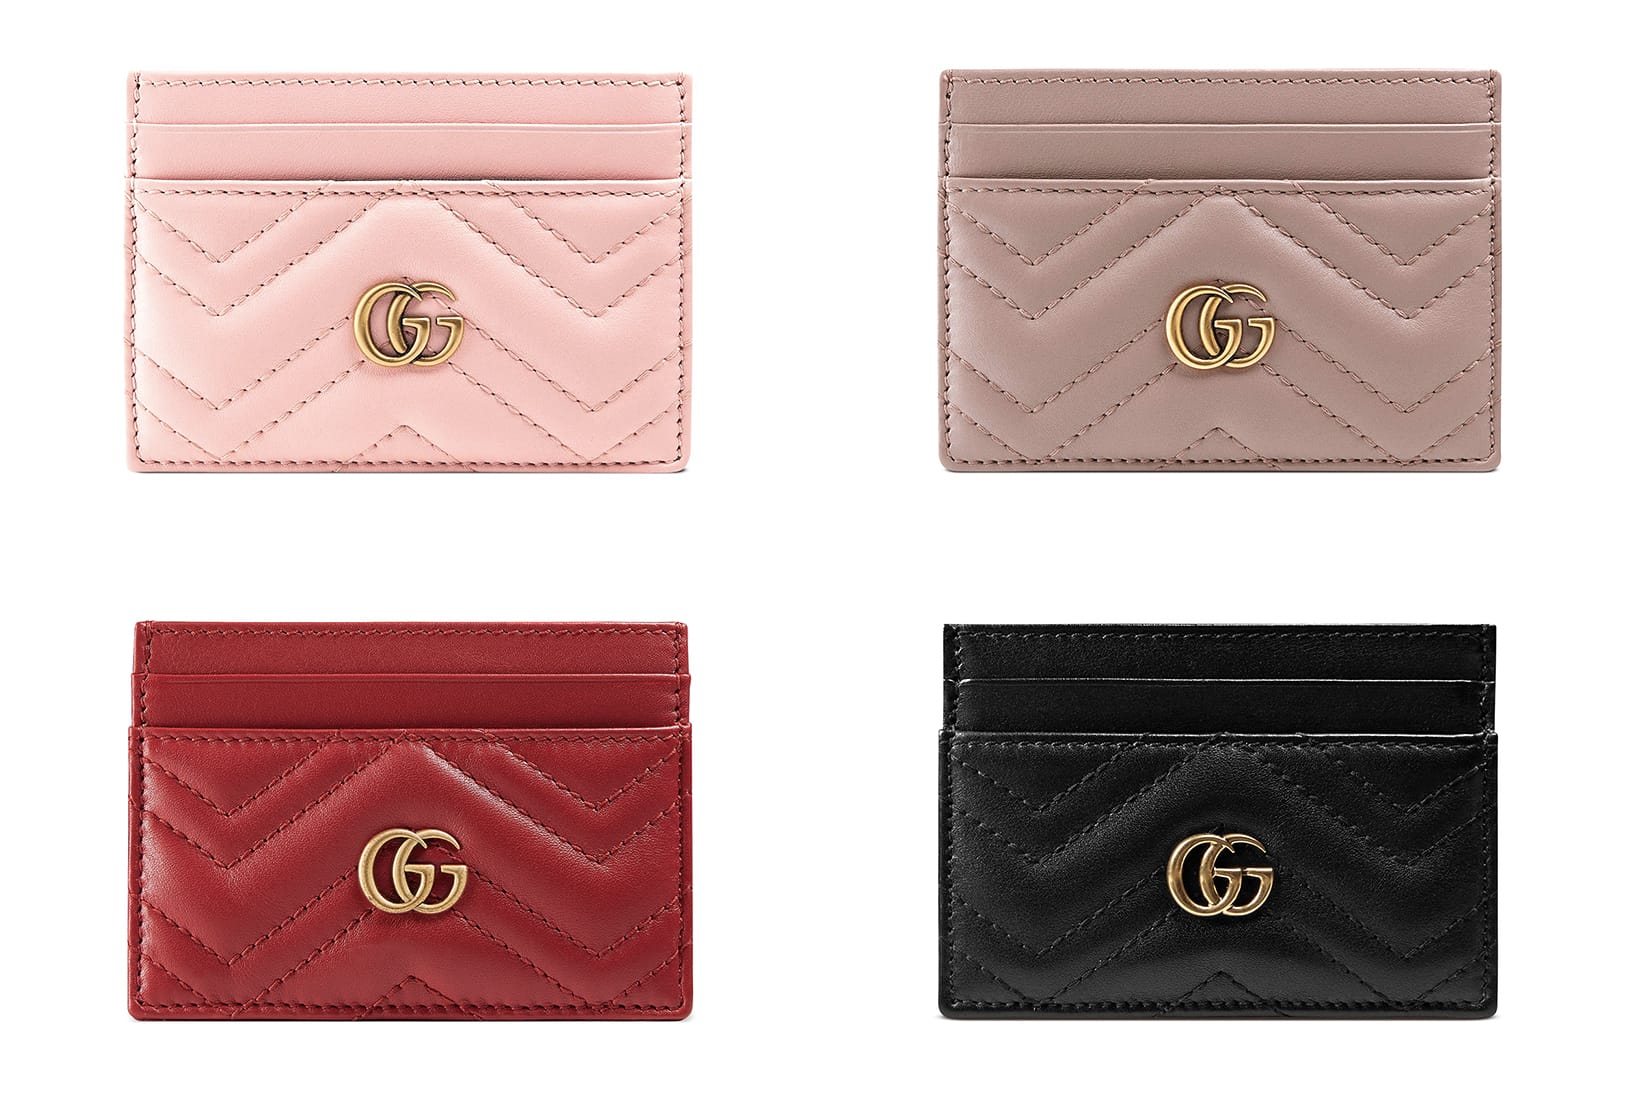 Where to buy Gucci's Leather Marmont Card Cases | MedzdravShops